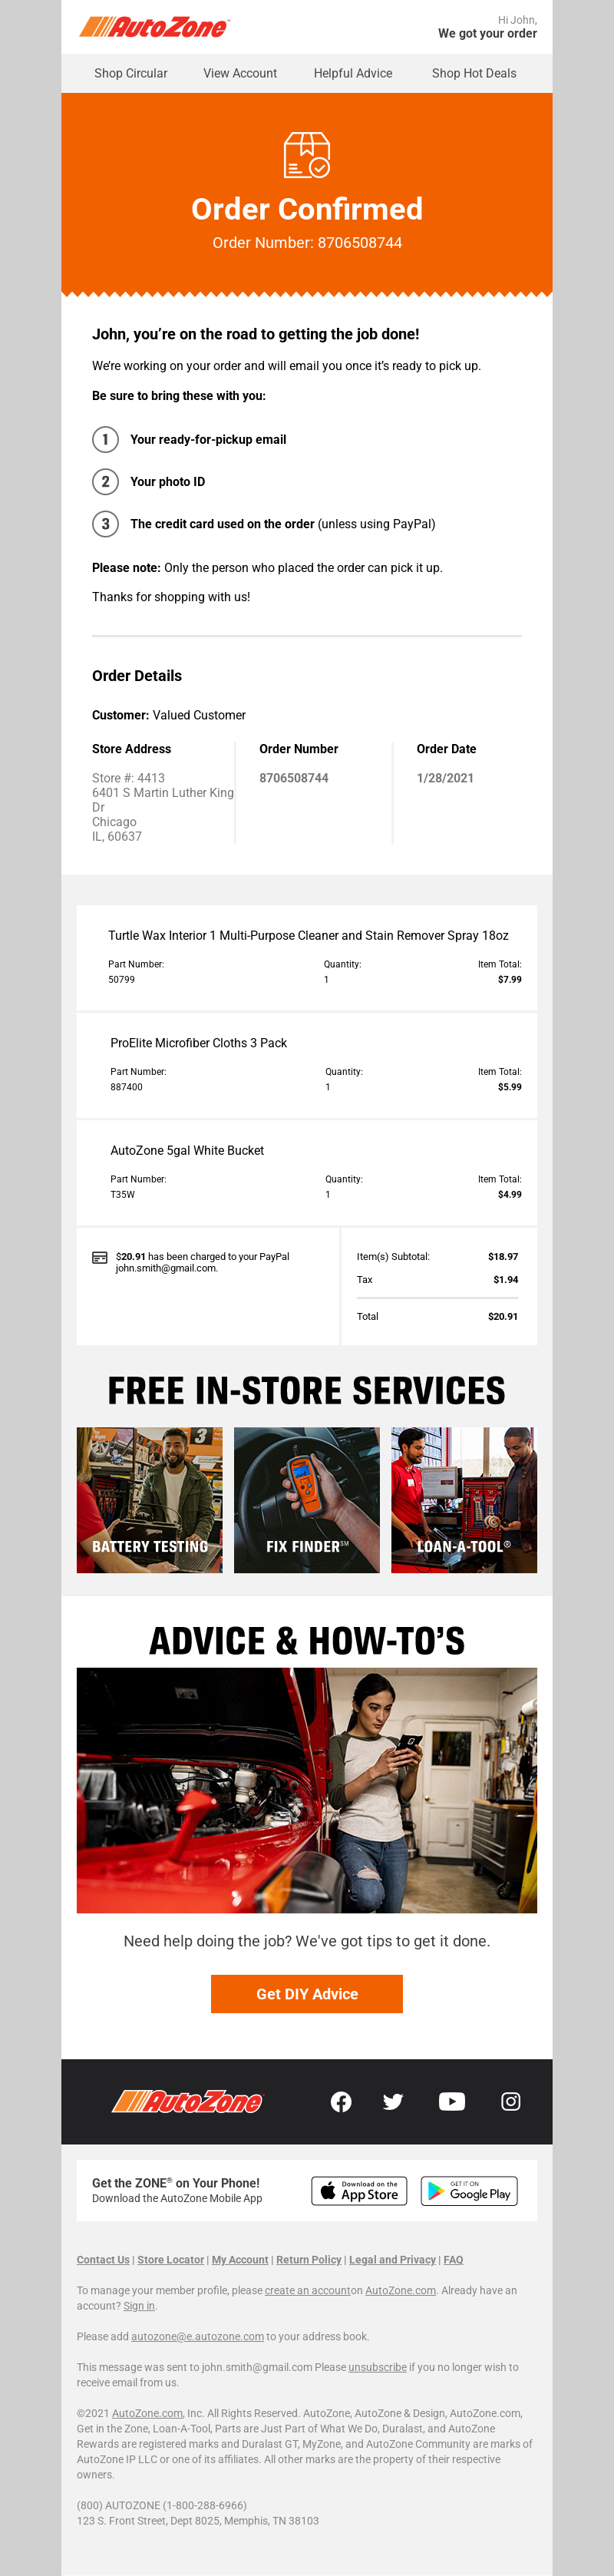 AutoZone Order Confirmation Industry Email Template screenshot